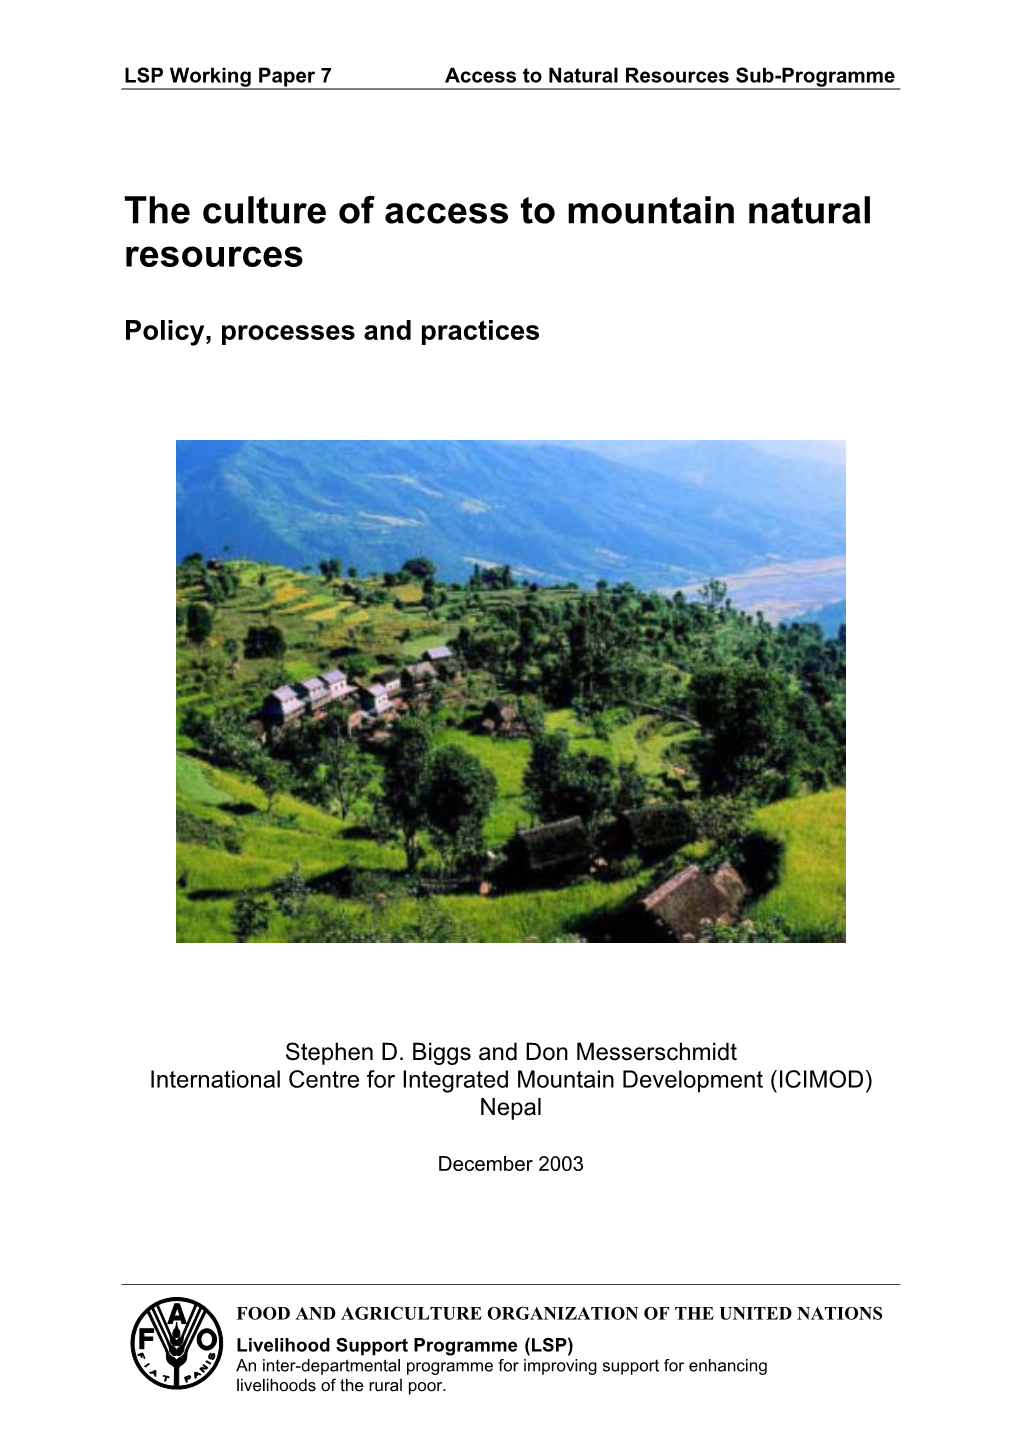 The Culture of Access to Mountain Natural Resources